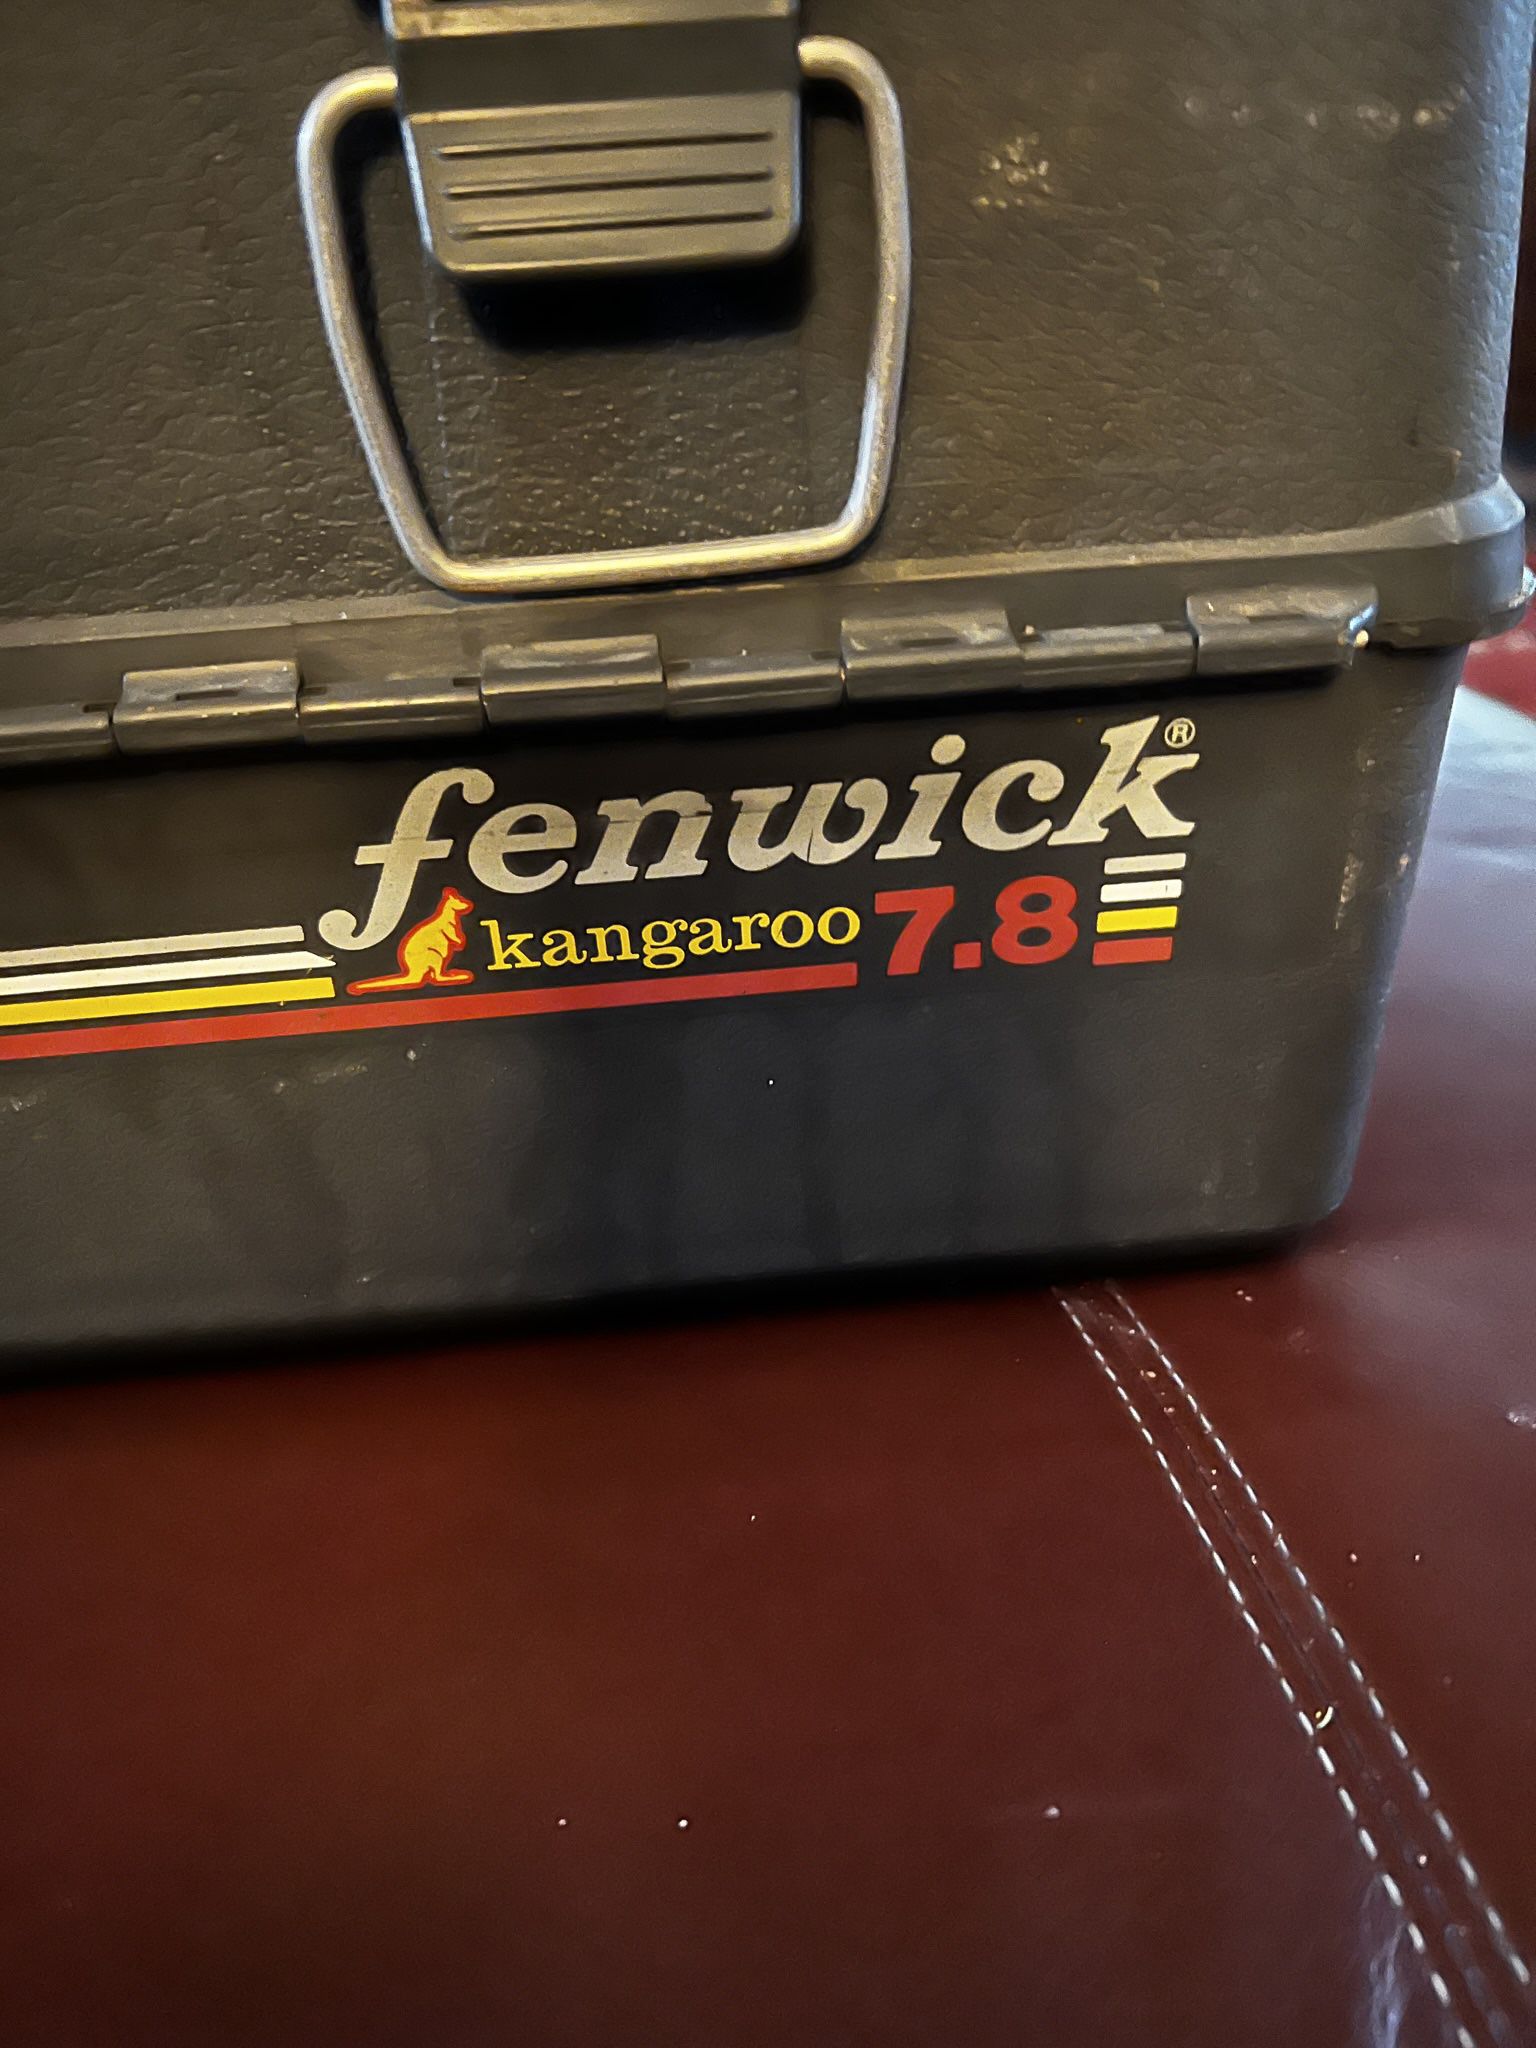 Fenwick Kangaroo 7.8 Tackle Box Filled With Tackle for Sale in El Cajon, CA  - OfferUp